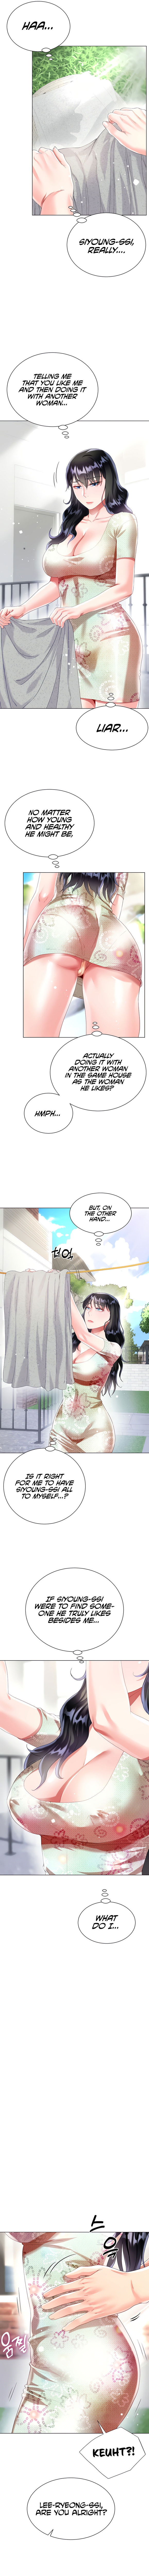 my-sister-in-laws-skirt-chap-32-10